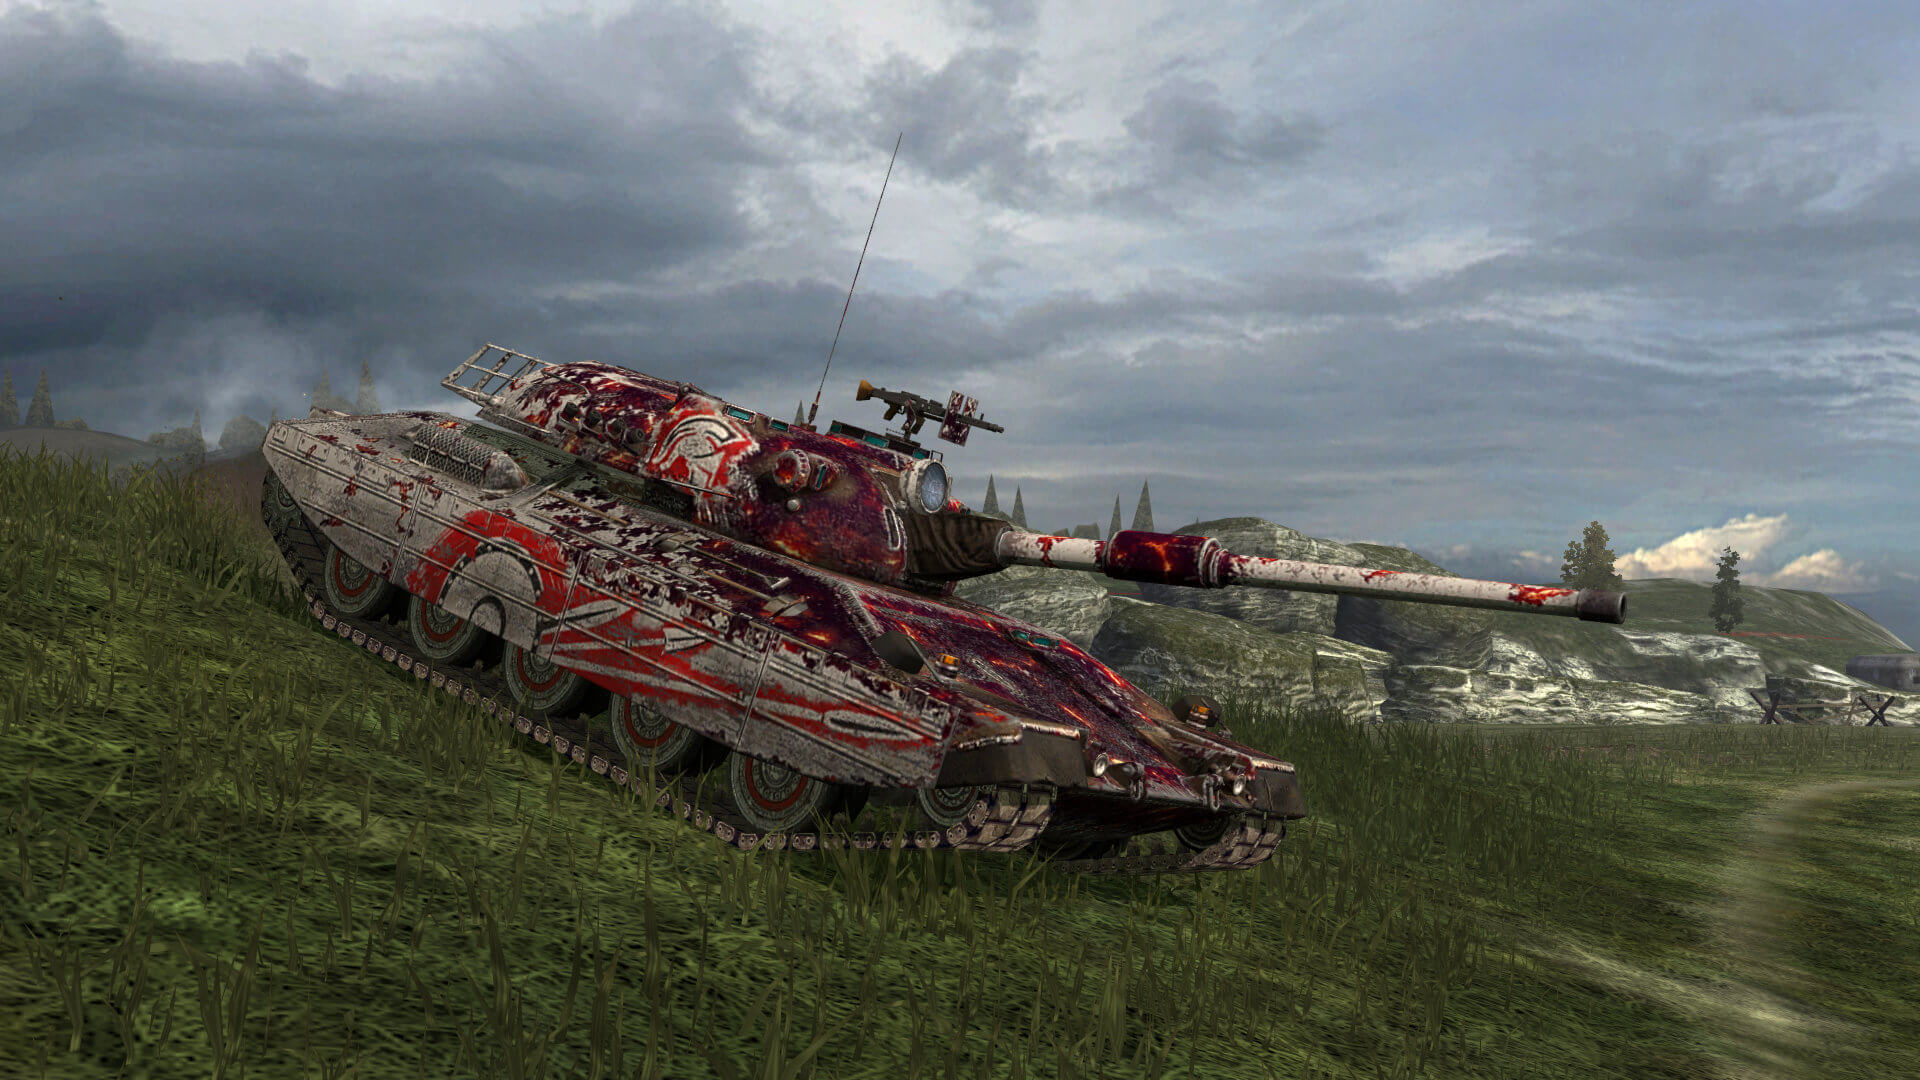 Sep 18 2019 Update 6 3 World Of Tanks Blitz Tog Ii It Finally Happened The European Nation The Highly Anticipated New Branch Becomes Available September 18 Research It To The Top And Enjoy The Advantages Of An Italian Tier X Tank With An